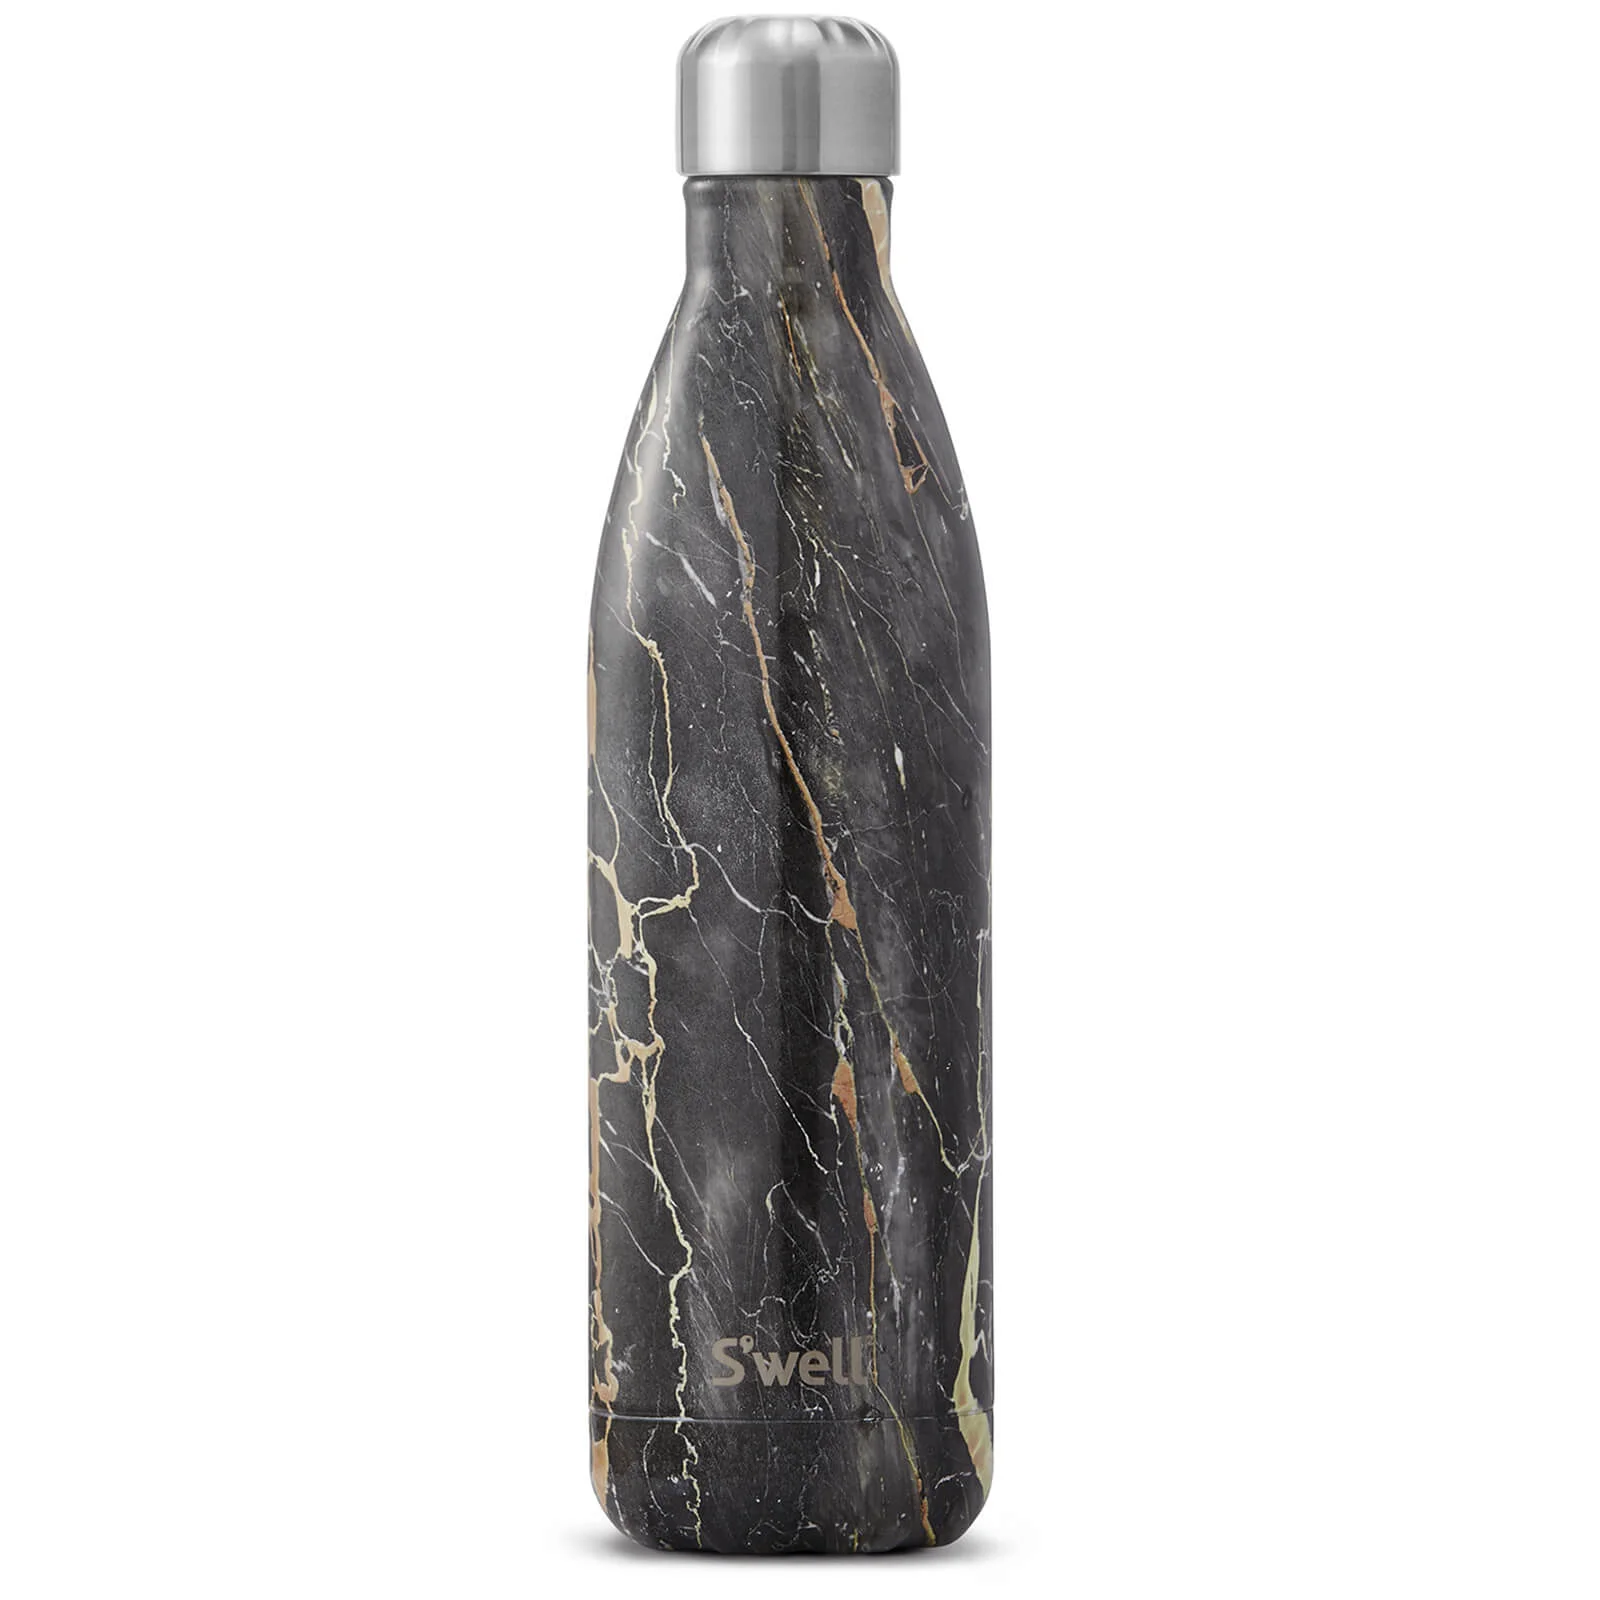 S'well The Bahamas Gold Marble Water Bottle 750ml Image 1